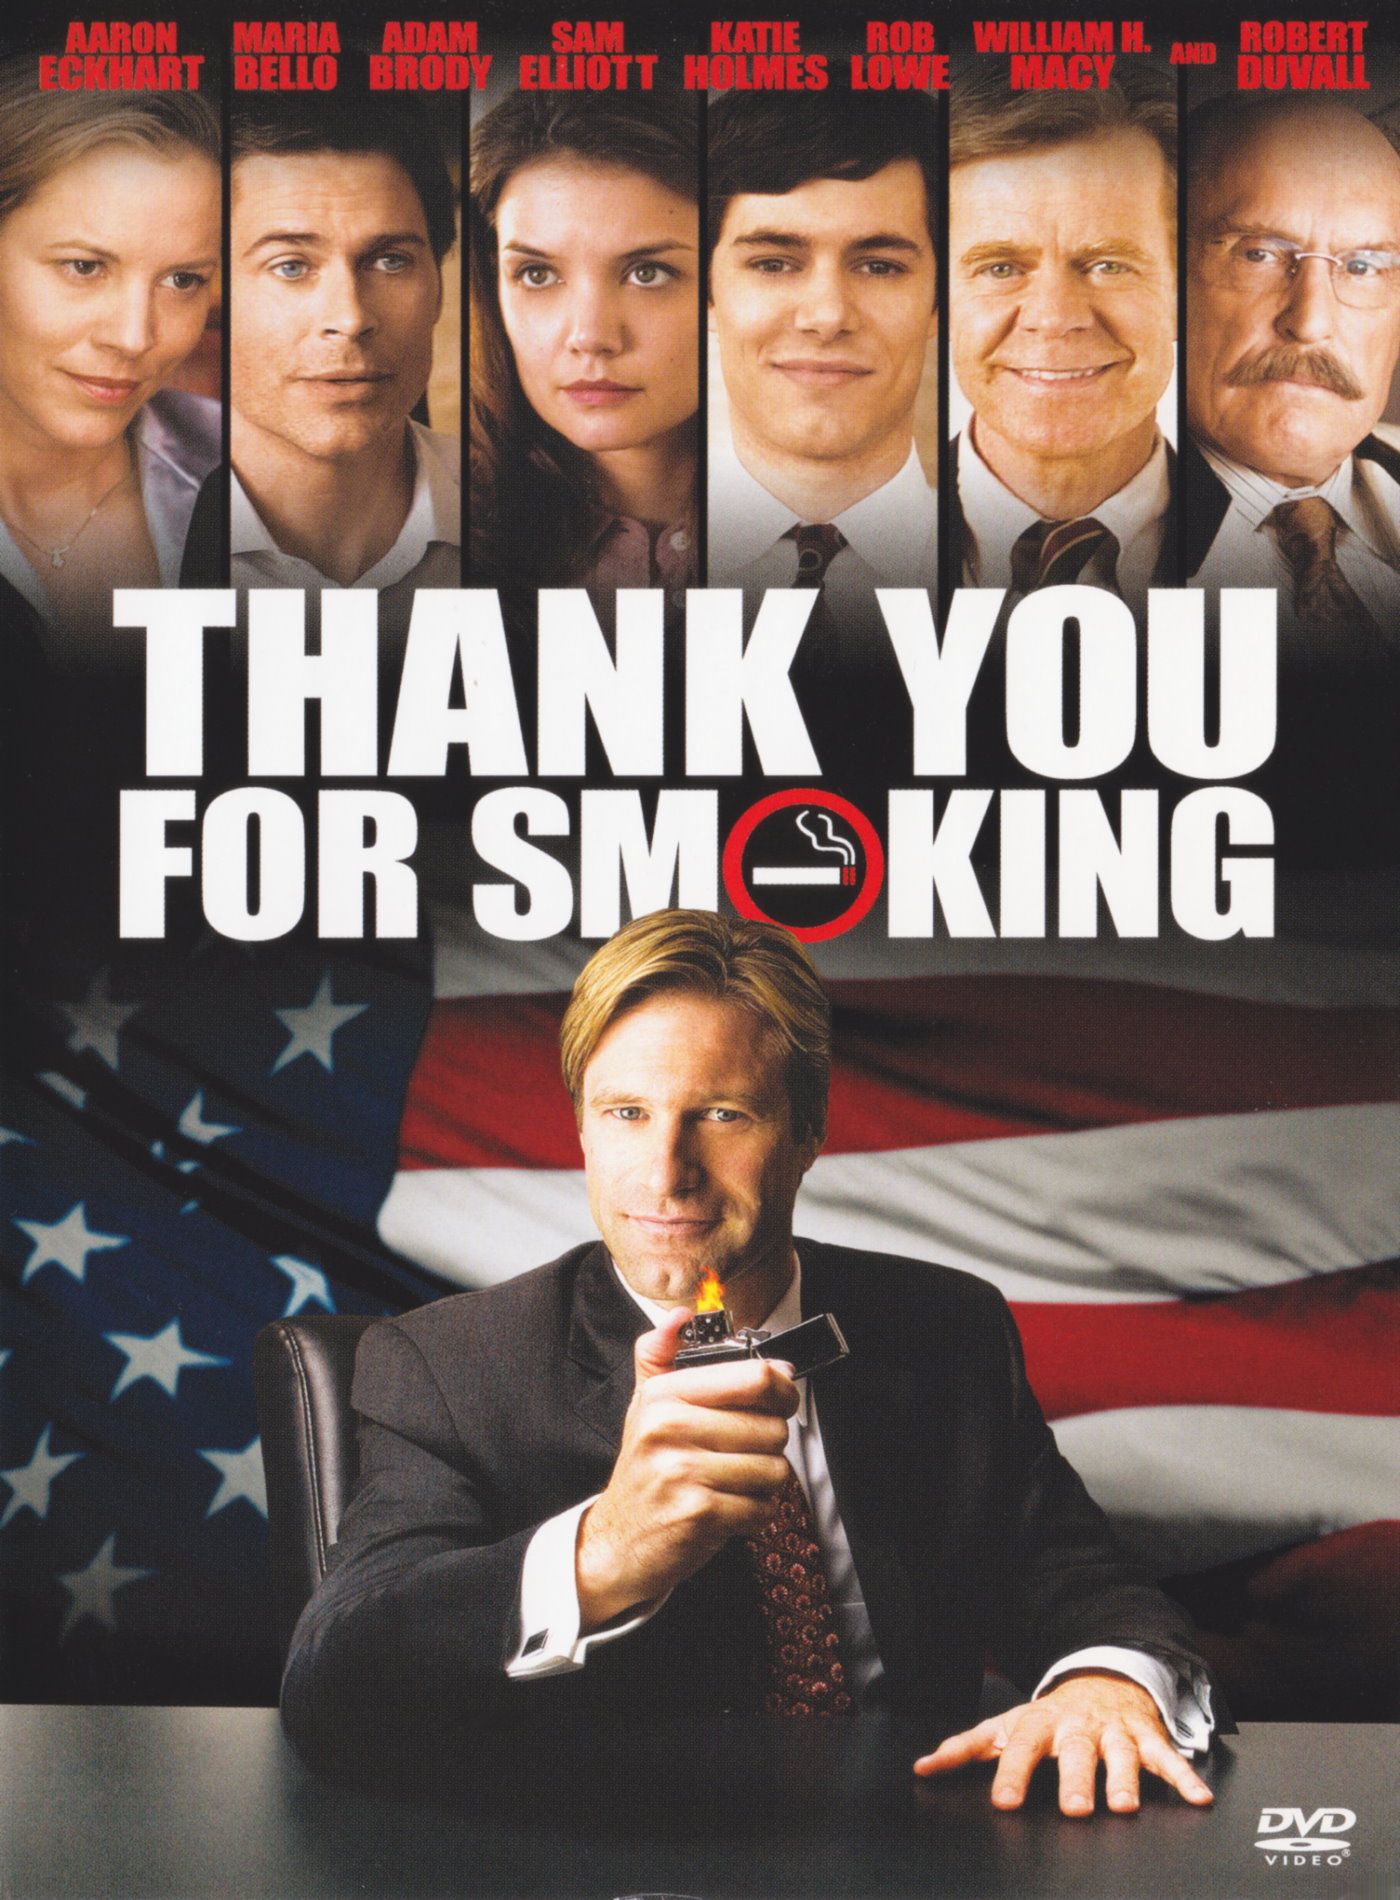 Cover - Thank You For Smoking.jpg